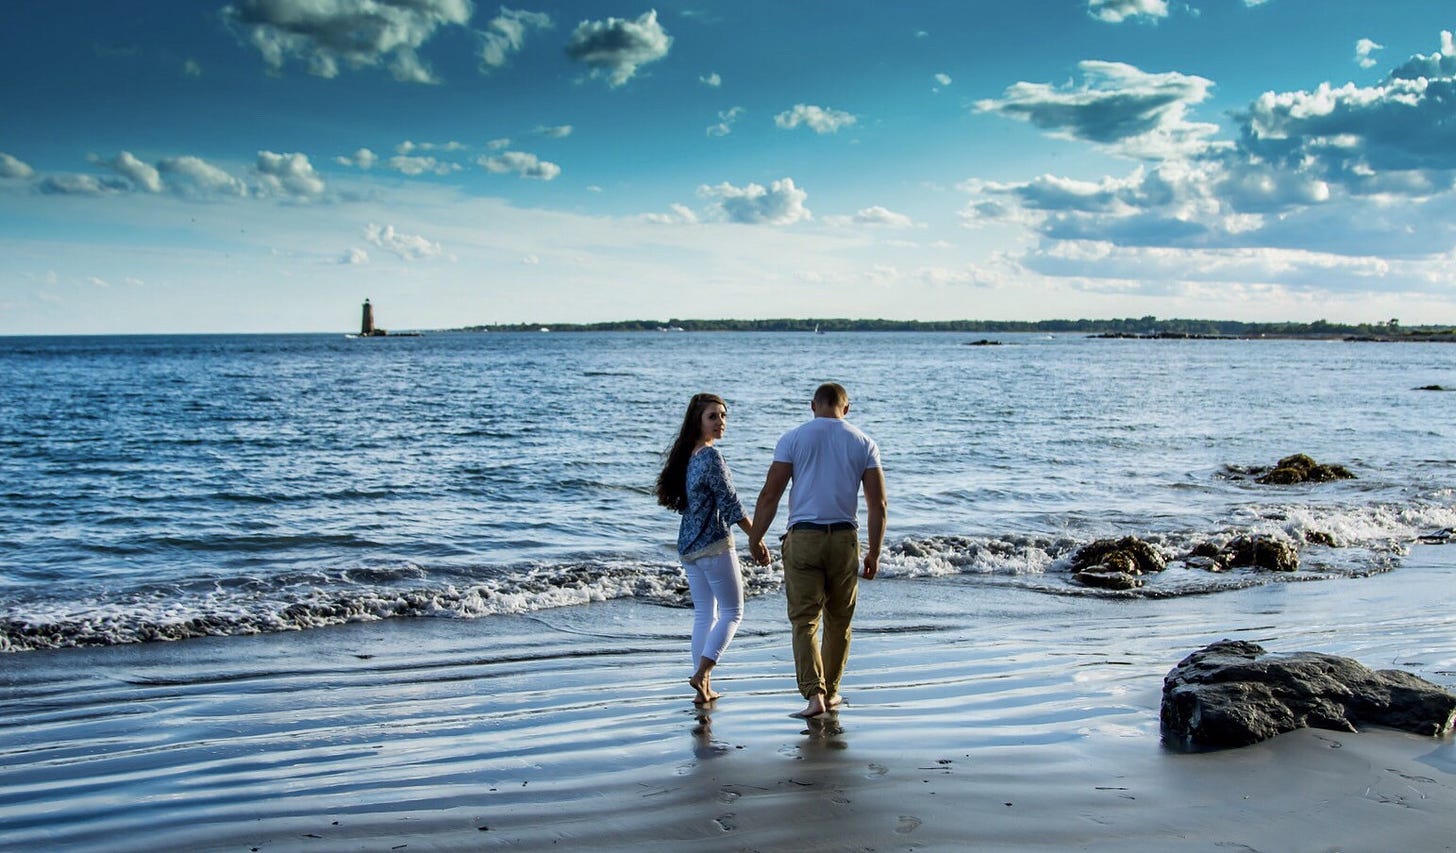 A couple walks along a beach on a sunny day. A lighthouse stands in the distance.